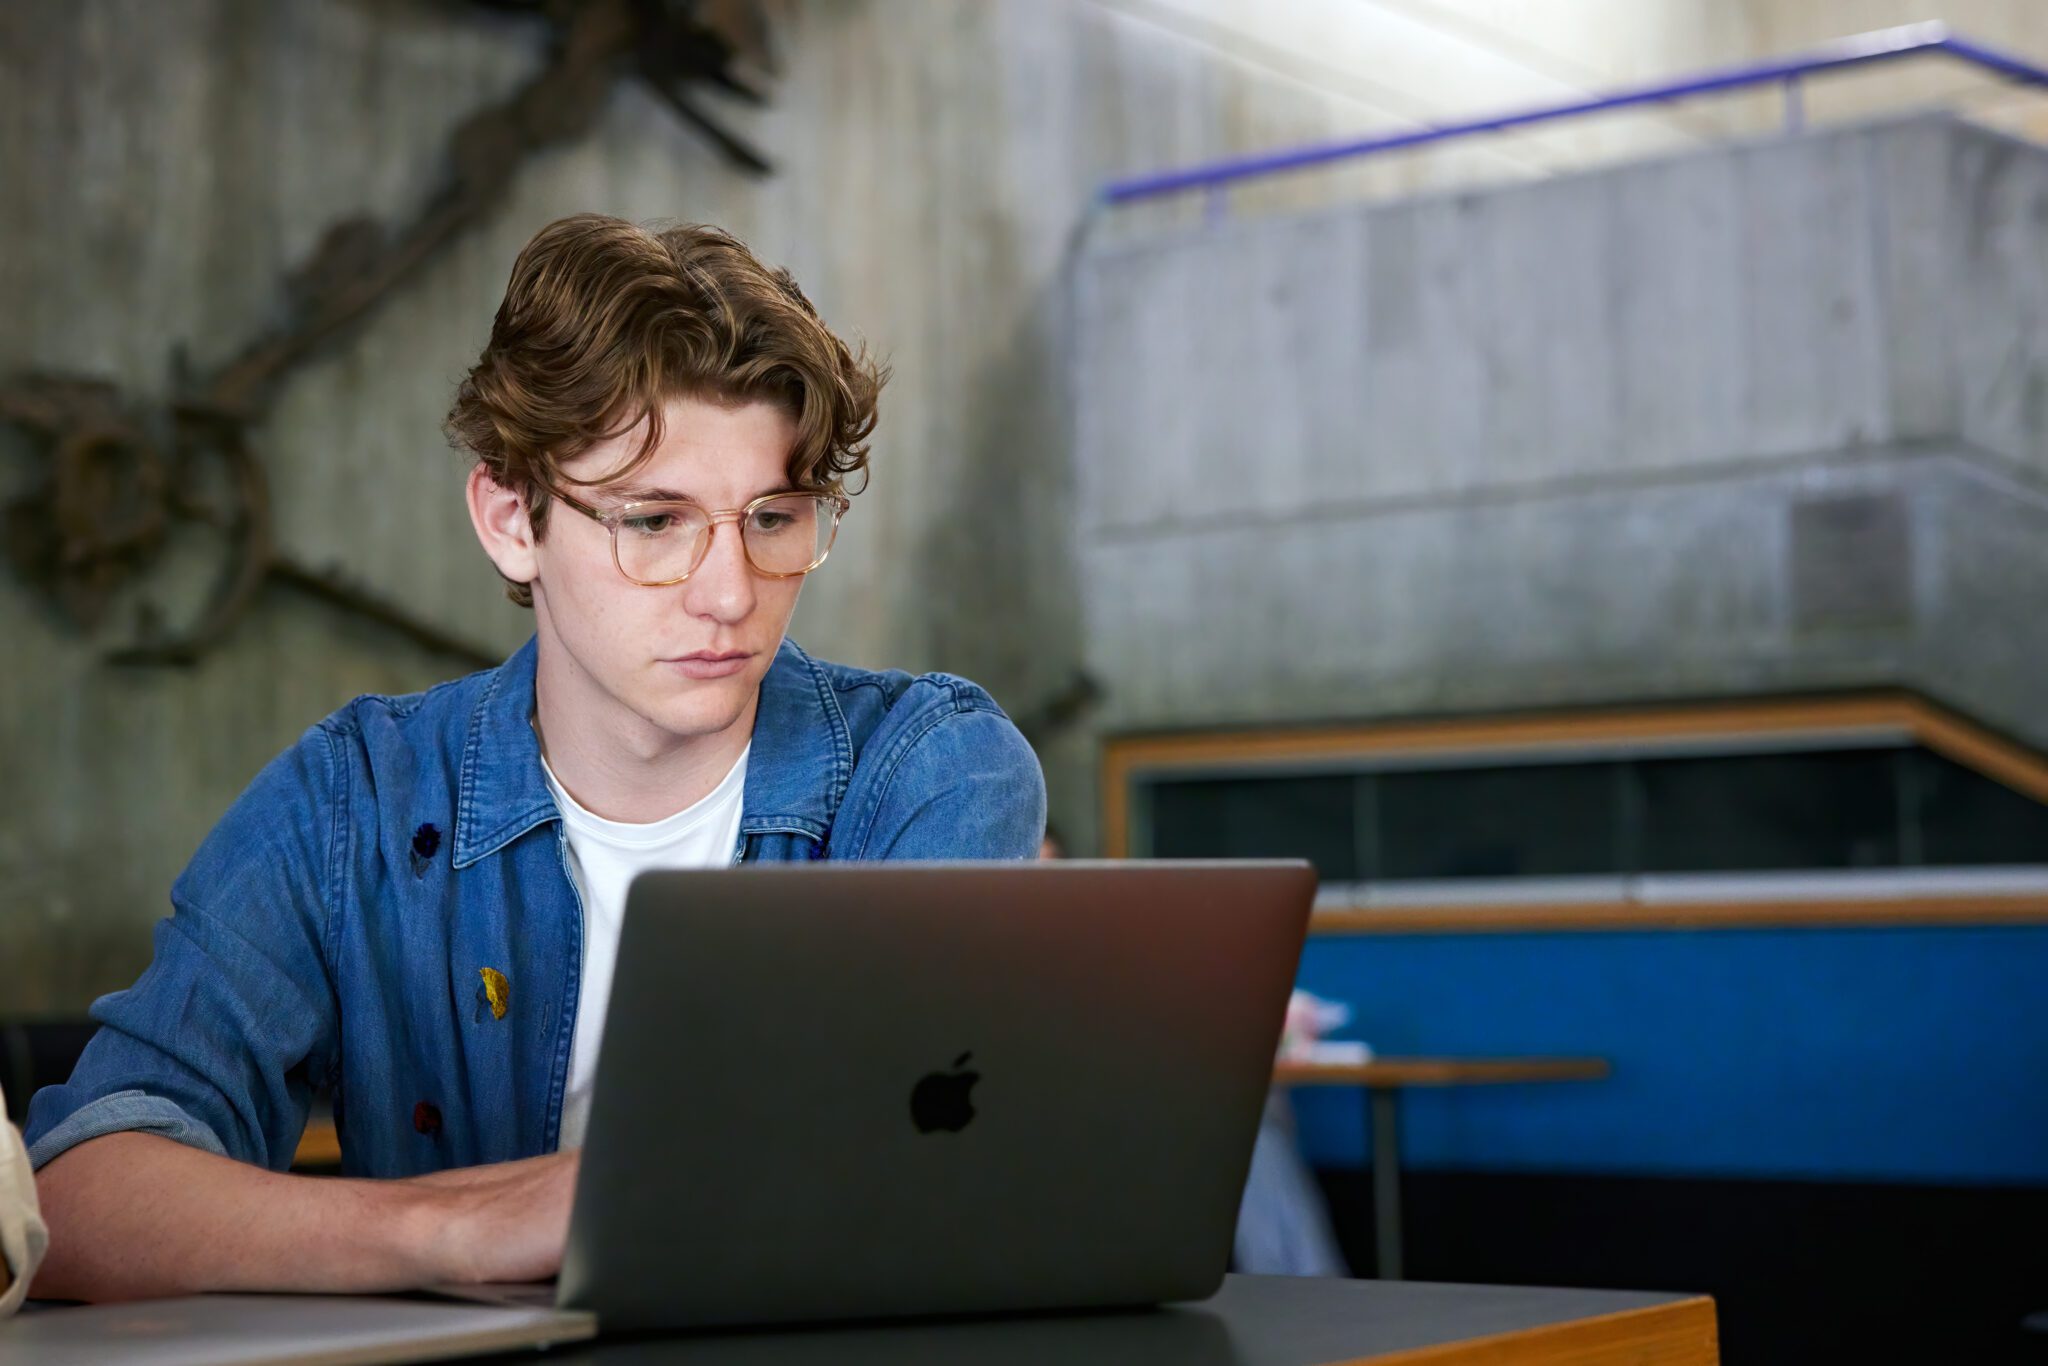 Student sitting indoors looking at a grey laptop.